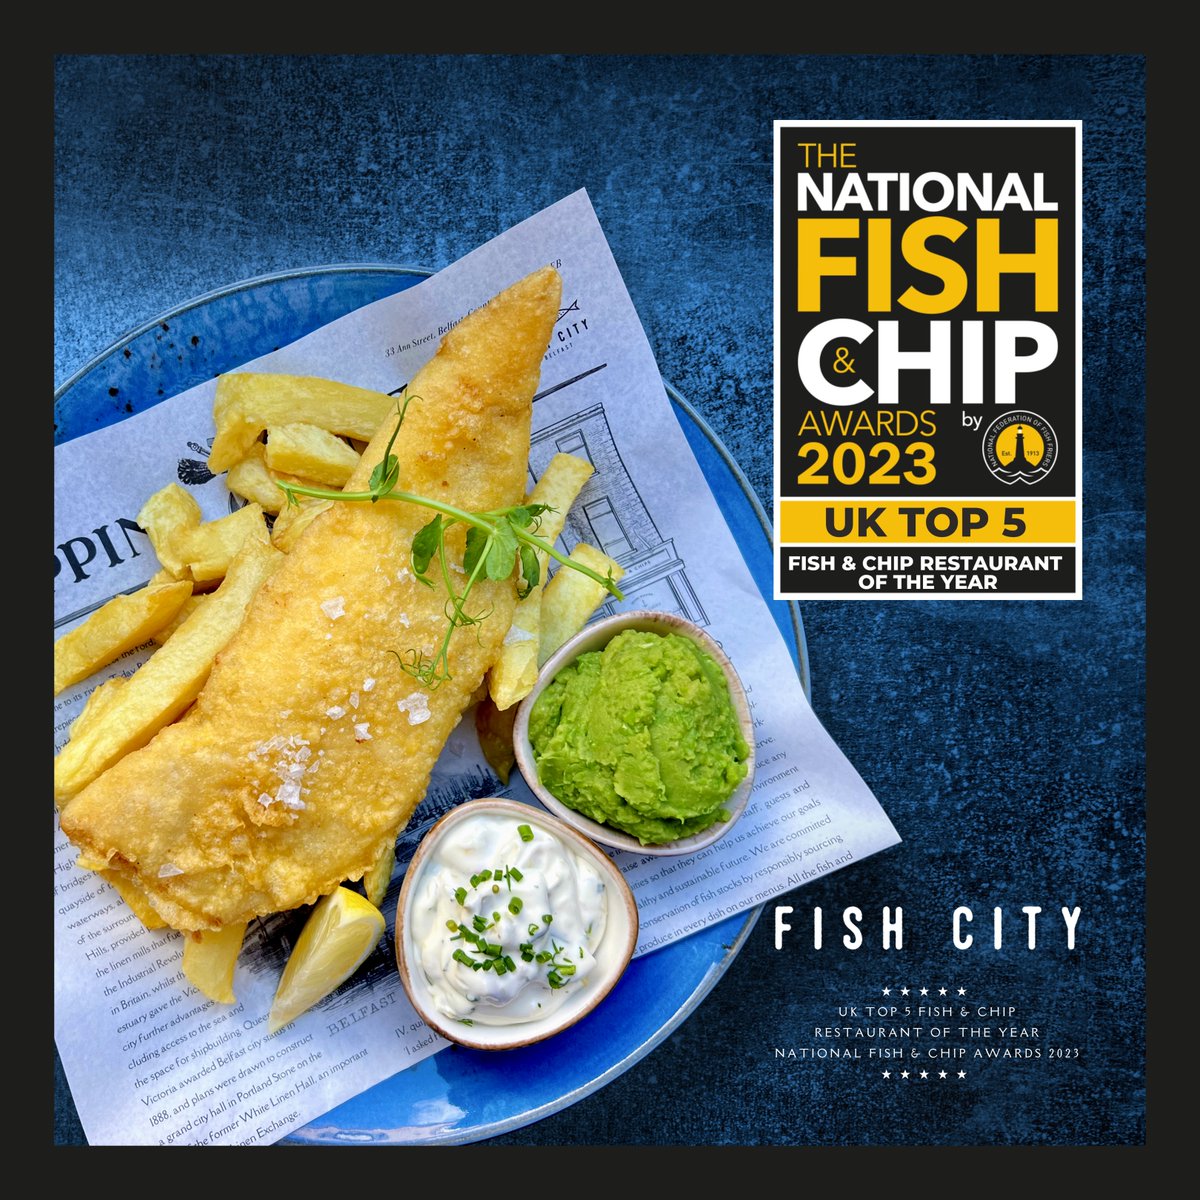 We're absolutely delighted to have been named in the #UKTop5 Fish & Chip Restaurants in the UK 🐟🍟 To our team who have made this achievement possible & our customers and communities who support us, thank you! 🙏🥳 #restaurantoftheyear #fishandchipawards #NFFF